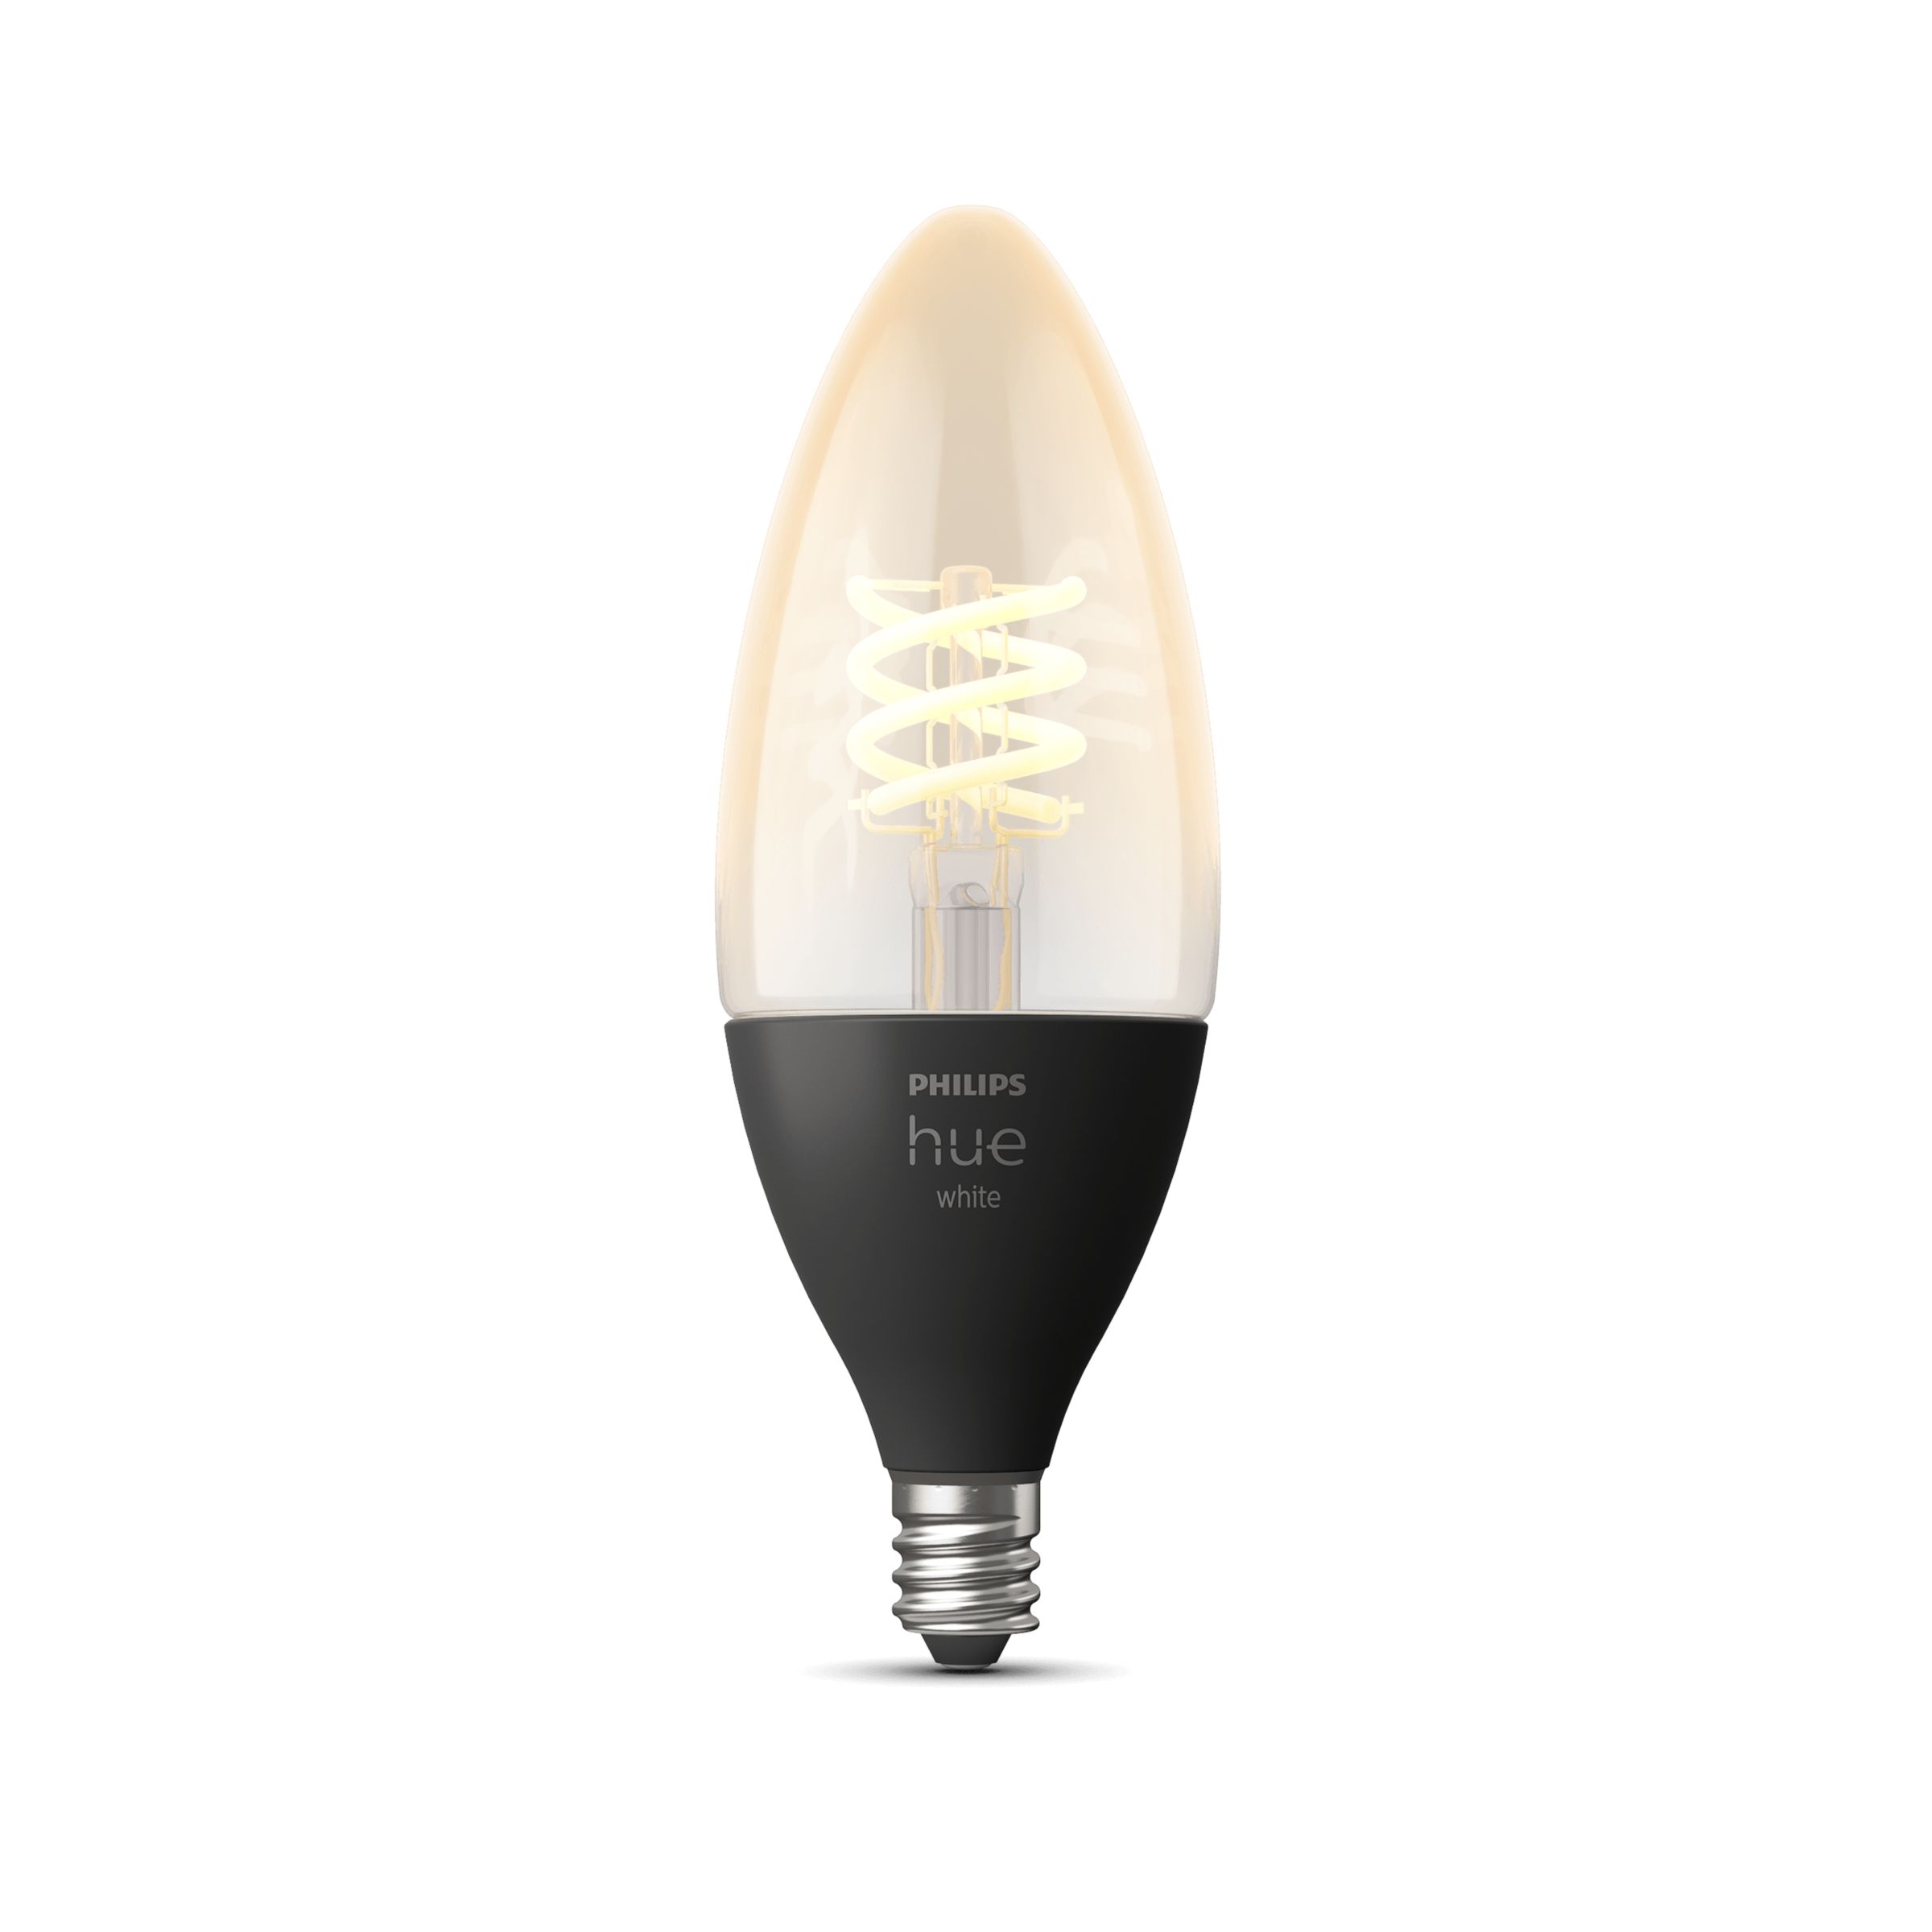 Philips Hue White bougie ampoule opaque dimmable - E14 6W 470lm 2700K 230V